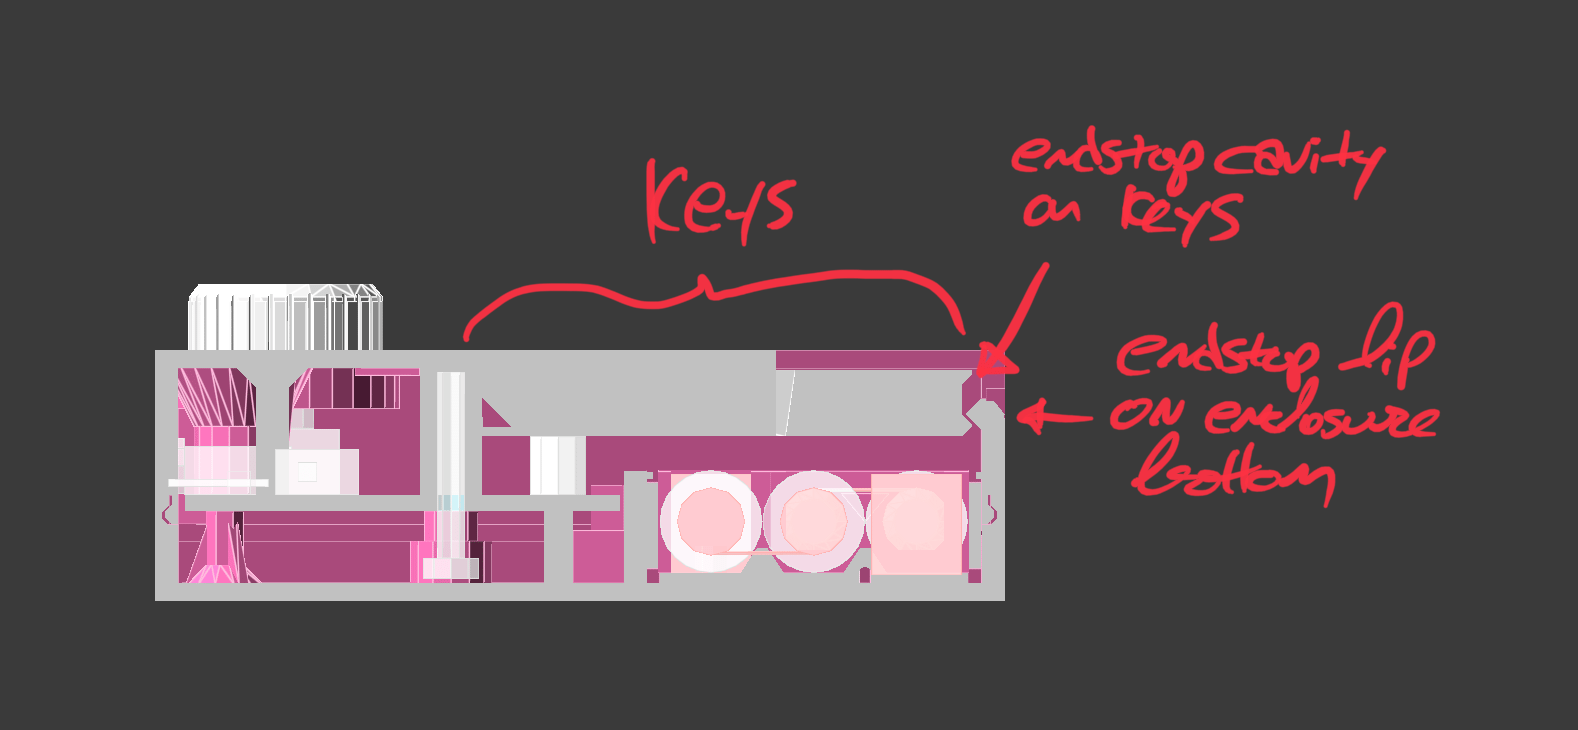 Cross section of the Scout with keys endstop annotated